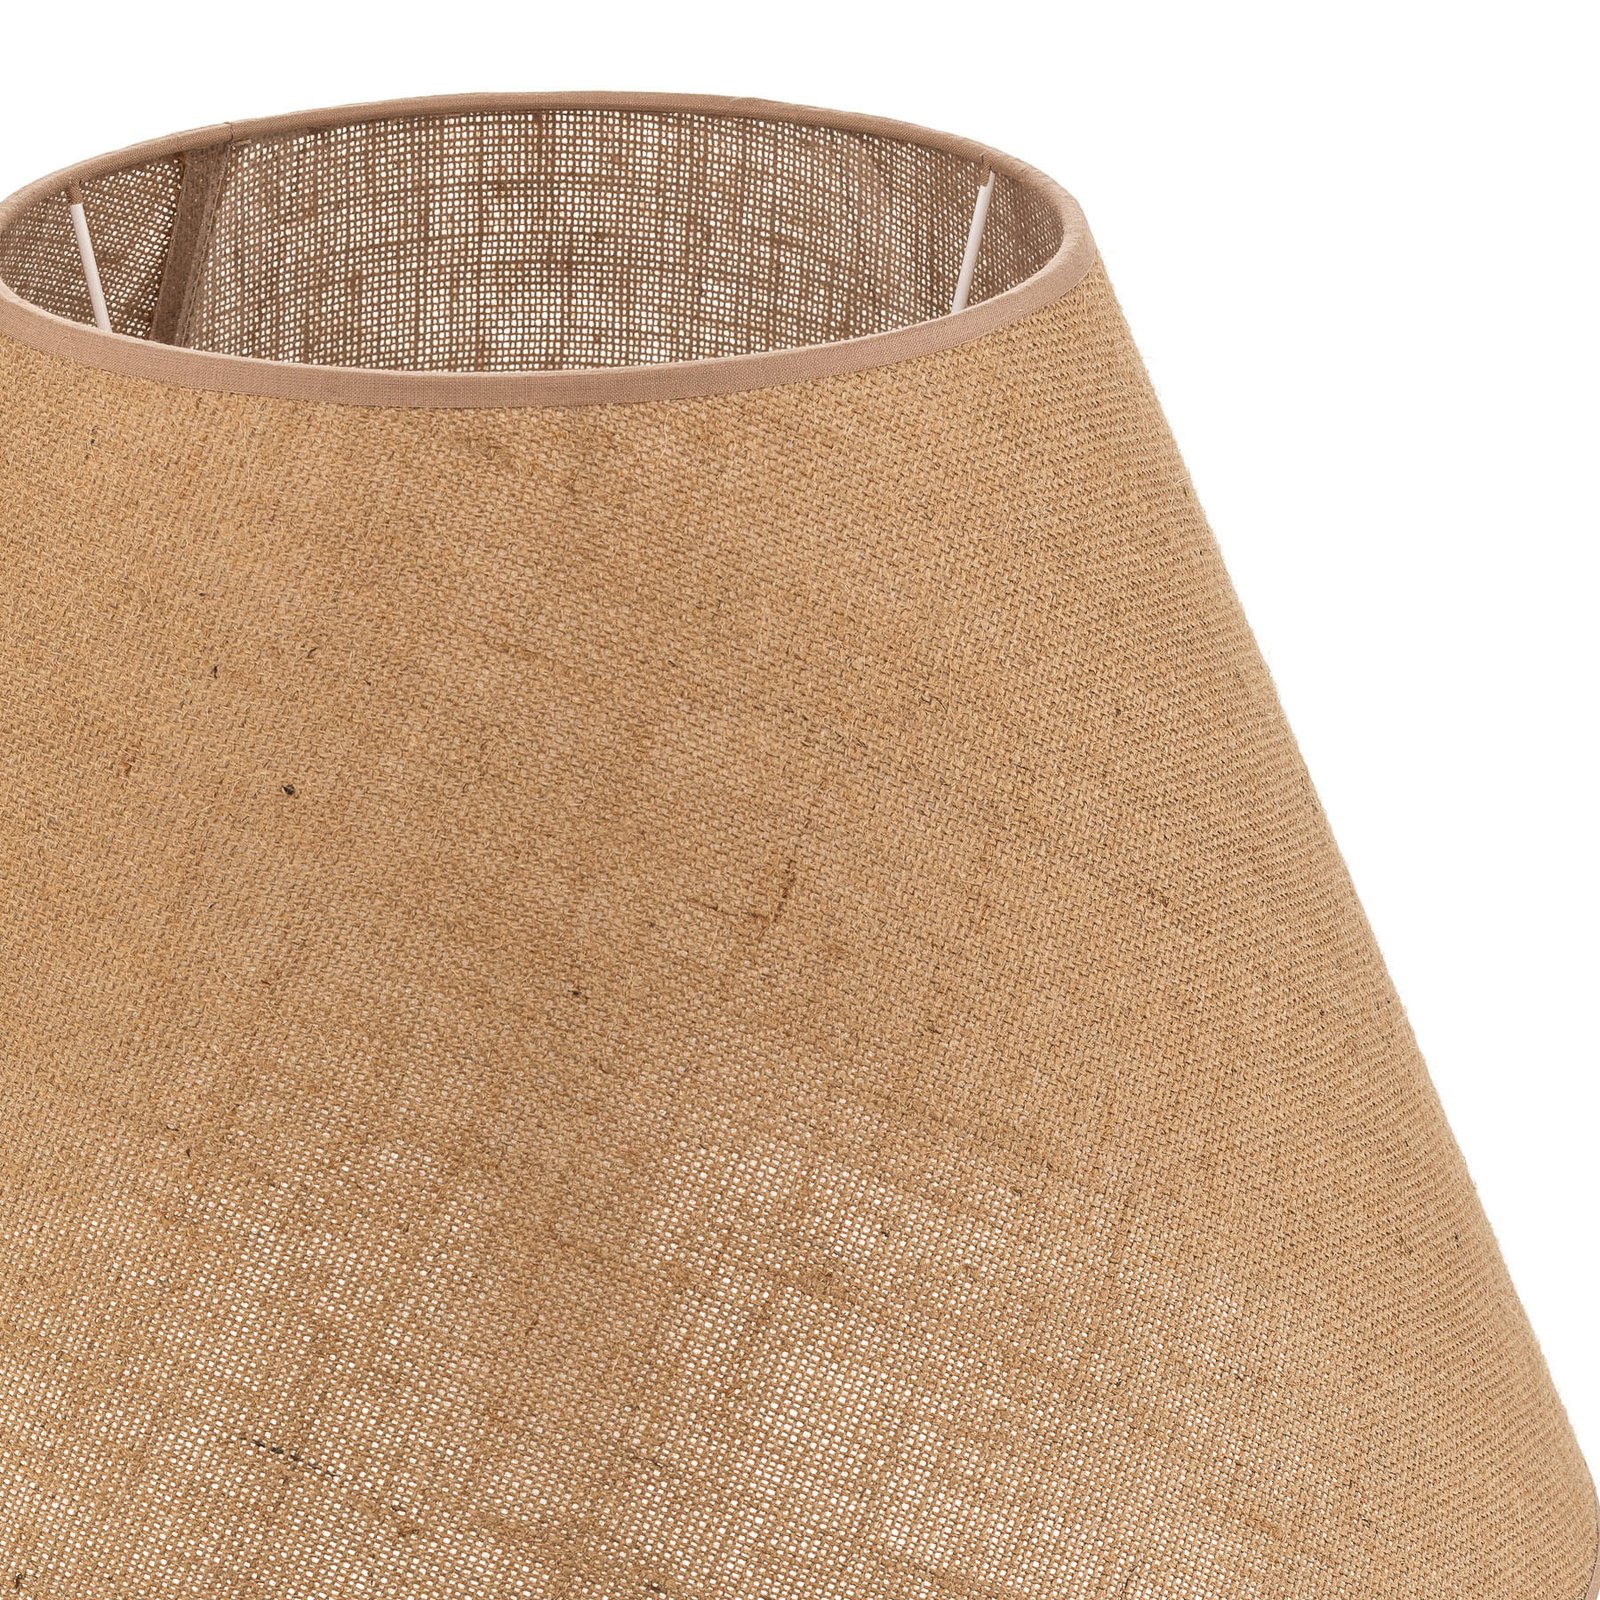 Pseudosofia lampshade for floor lamps light brown